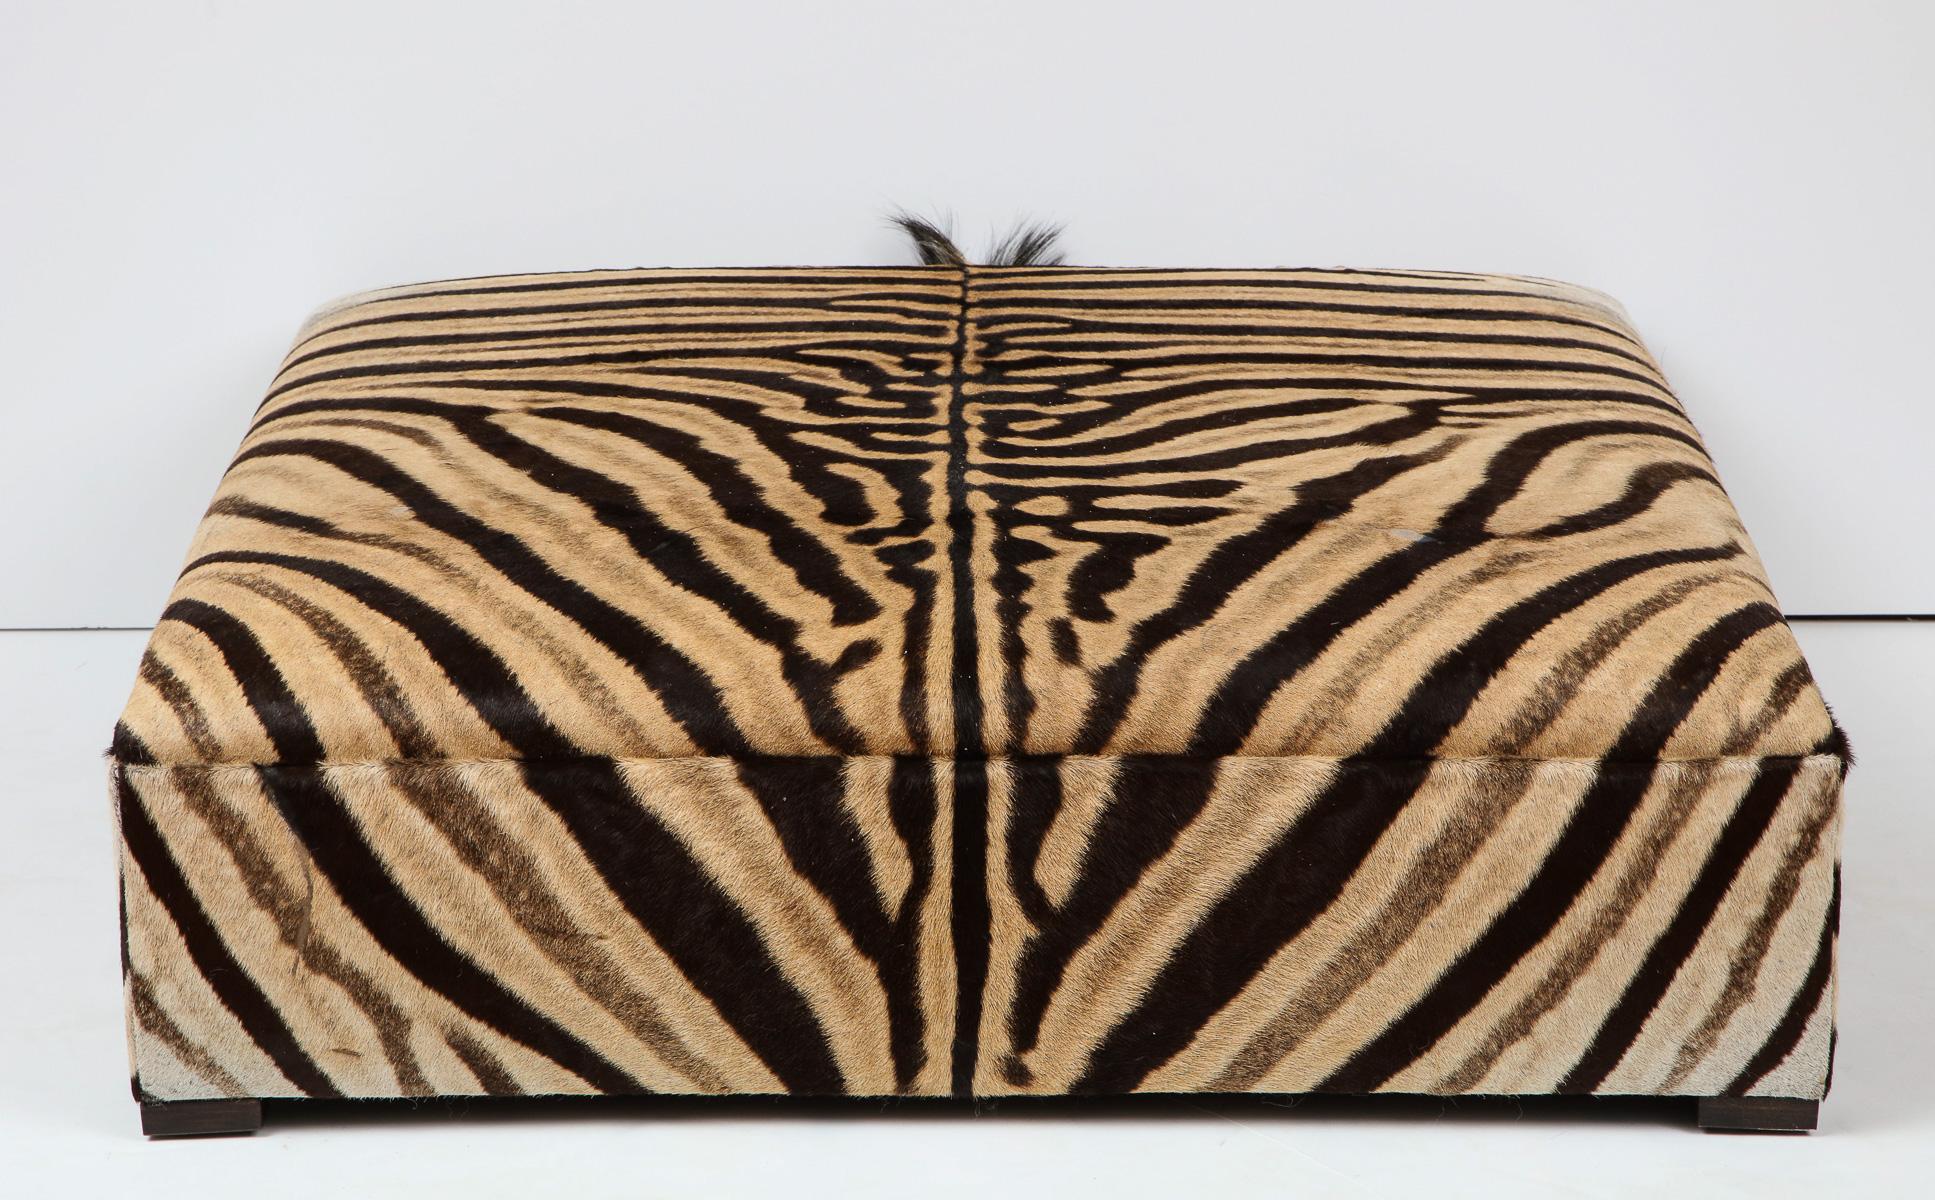 Contemporary Zebra Ottoman / Coffee Table, Large Square, Two Zebra hides, Custom Made In USA For Sale